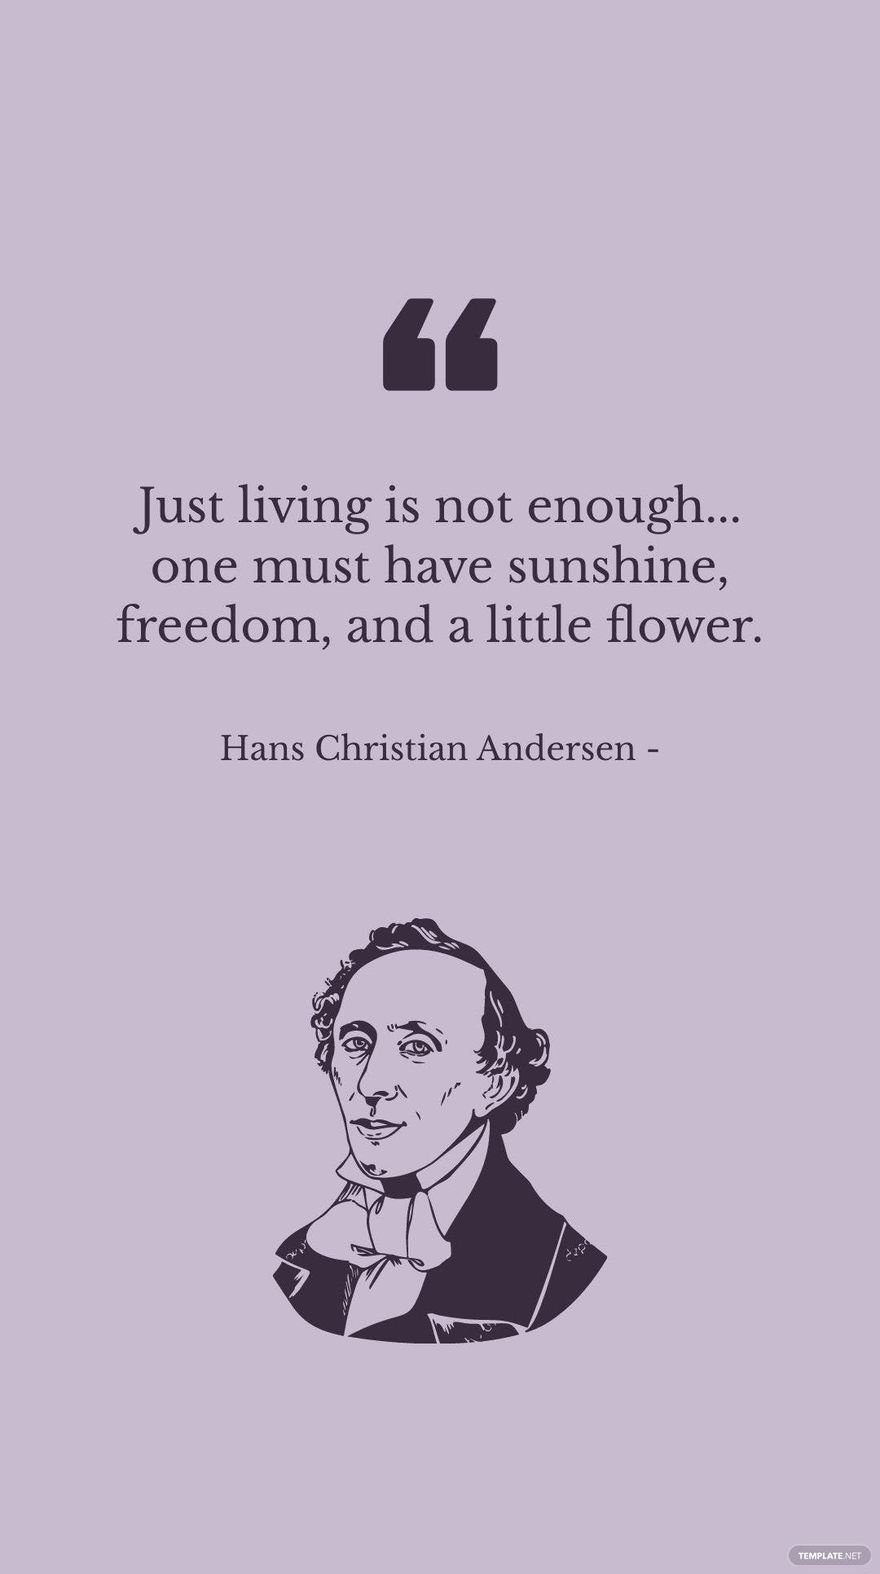 Hans Christian Andersen - Just living is not enough... one must have sunshine, freedom, and a little flower.